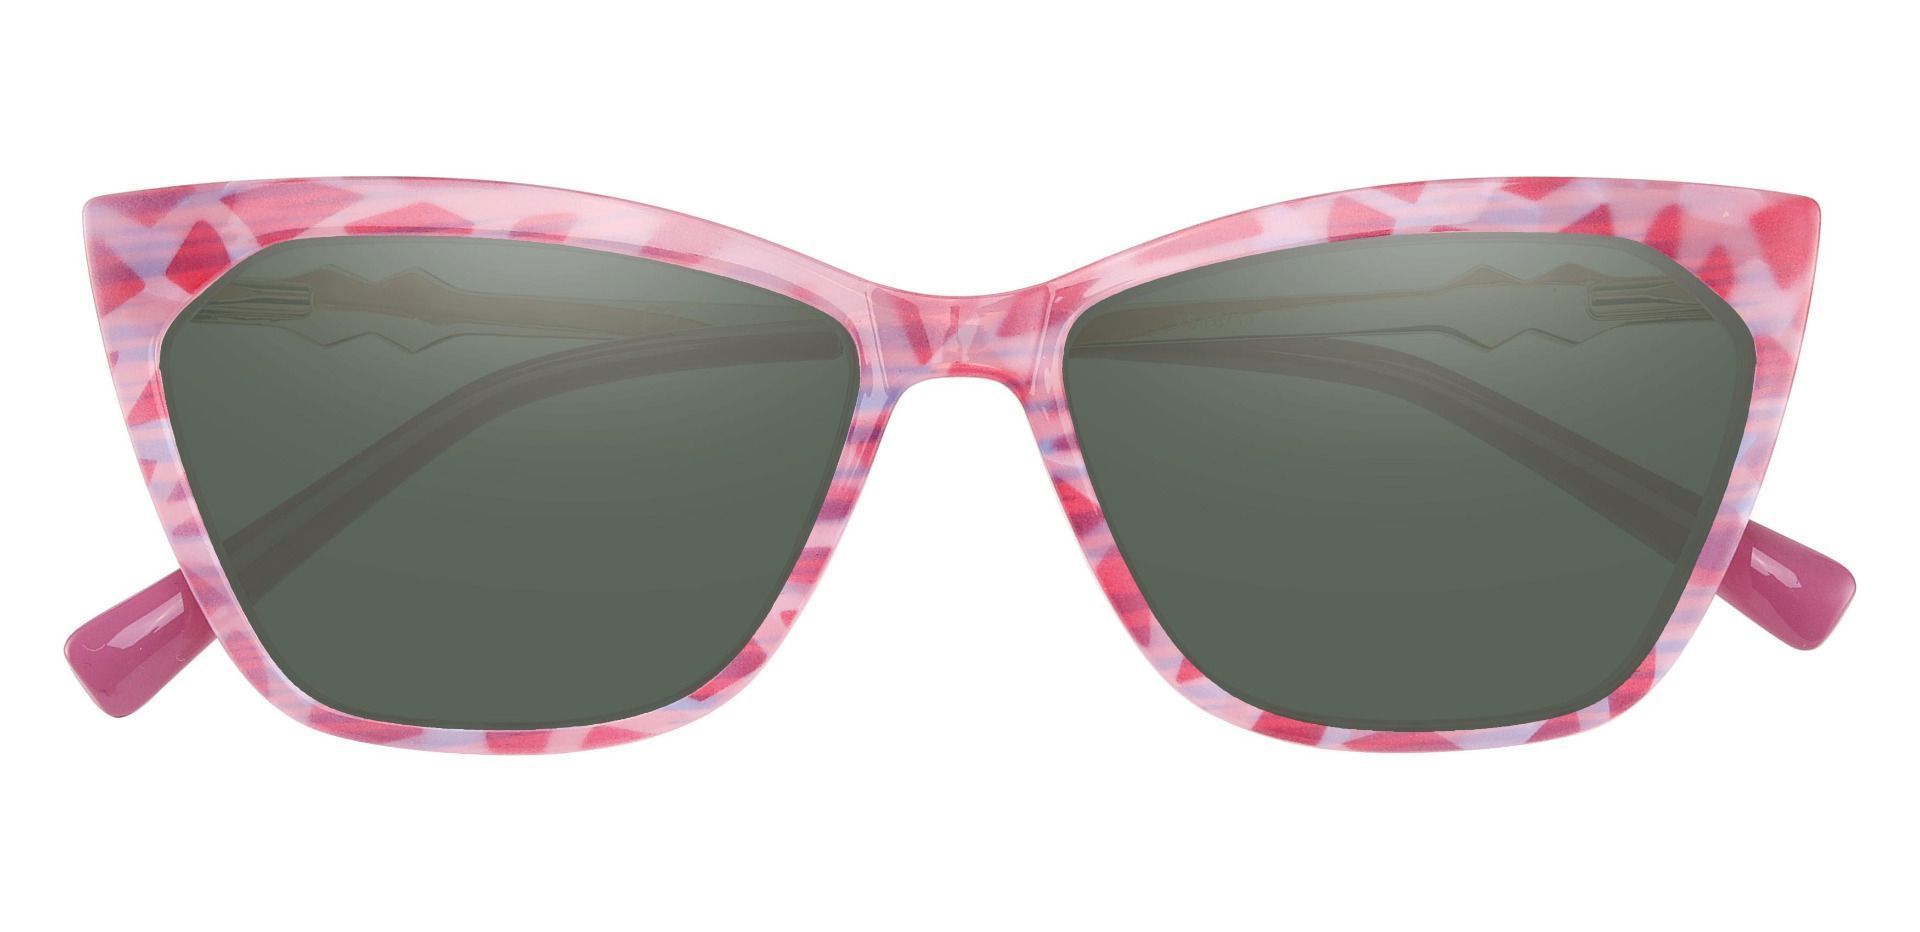 Addison Cat Eye Lined Bifocal Sunglasses - Pink Frame With Green Lenses